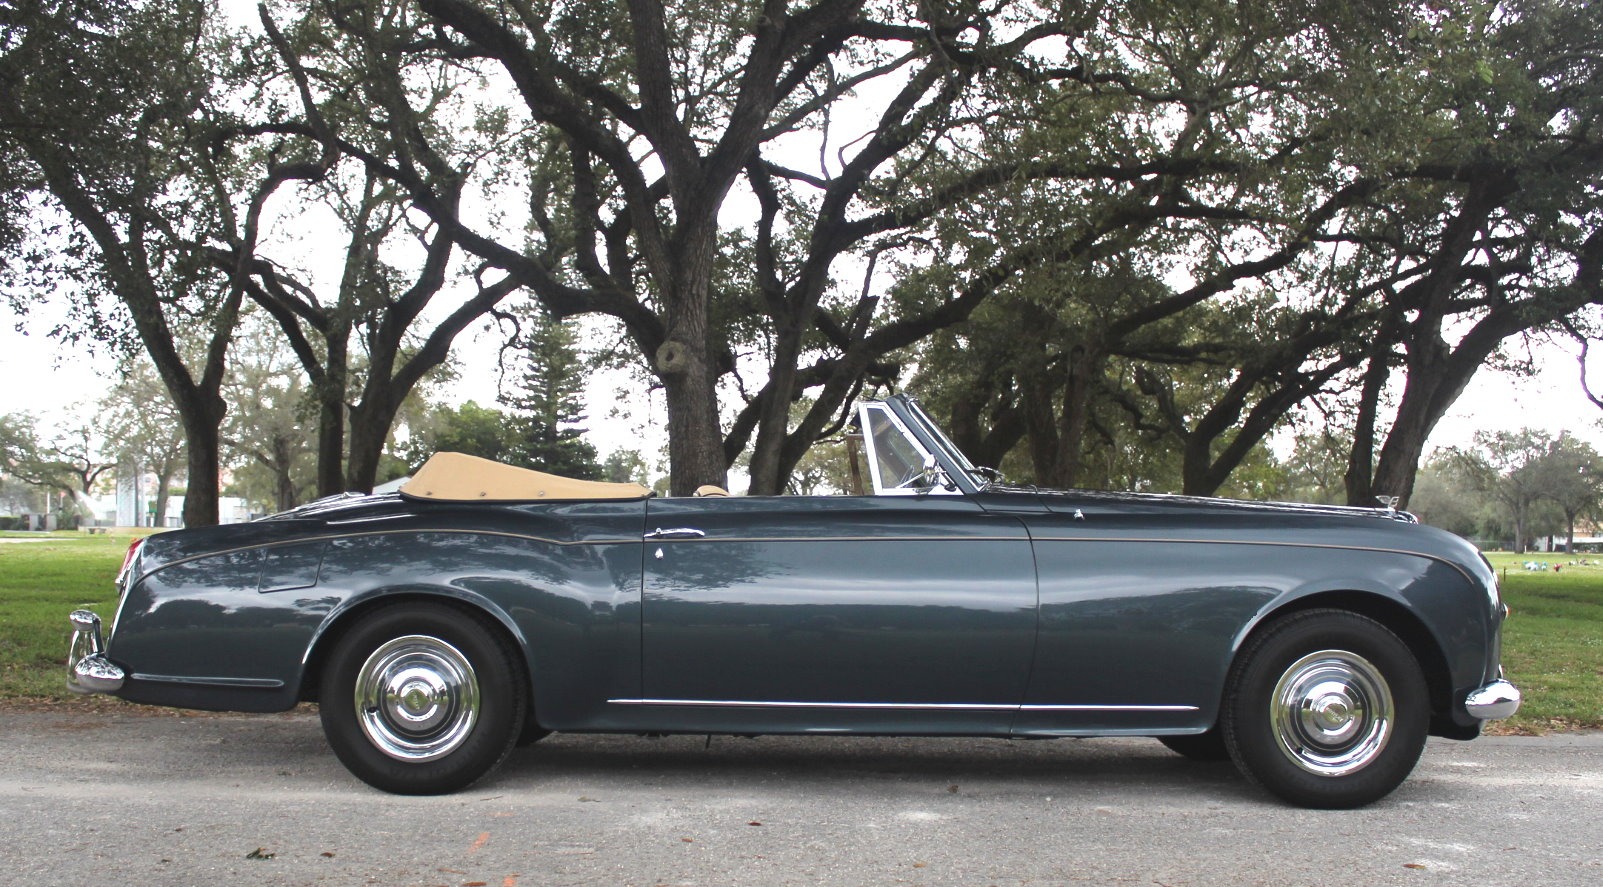 Used-1958-Bentley-S1-Continental-Convertible